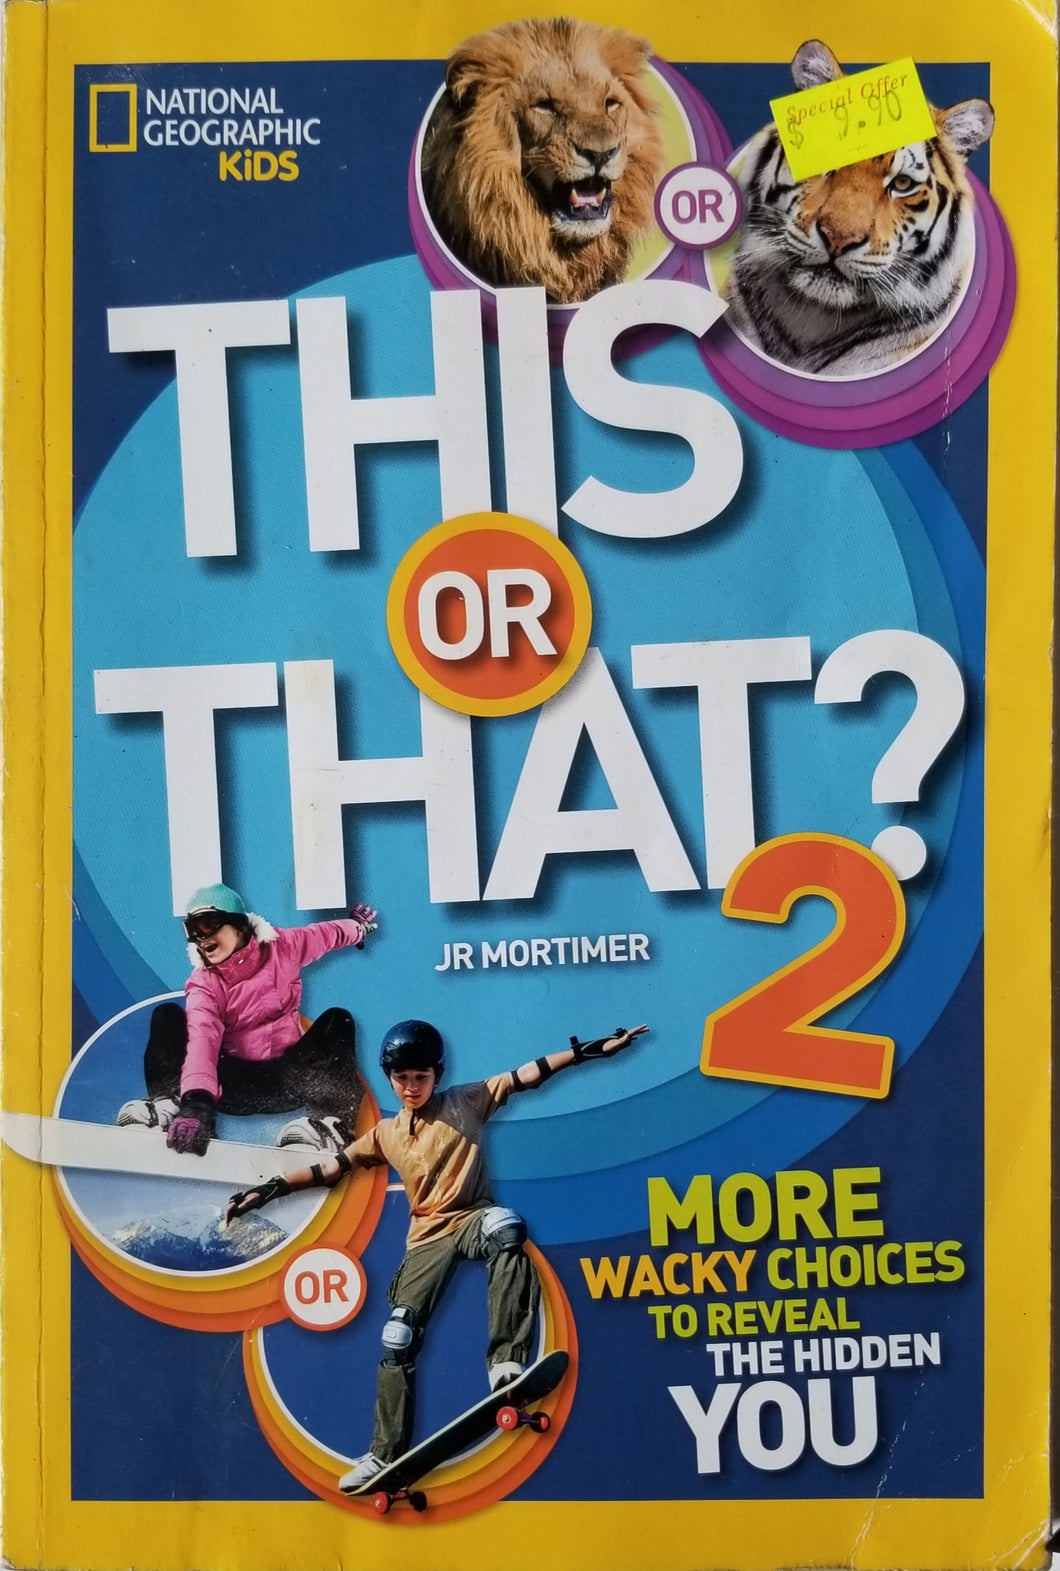 This or That? 2 : More Wacky Choices to Reveal the Hidden You -National Geographic Kids /J.R. mortime